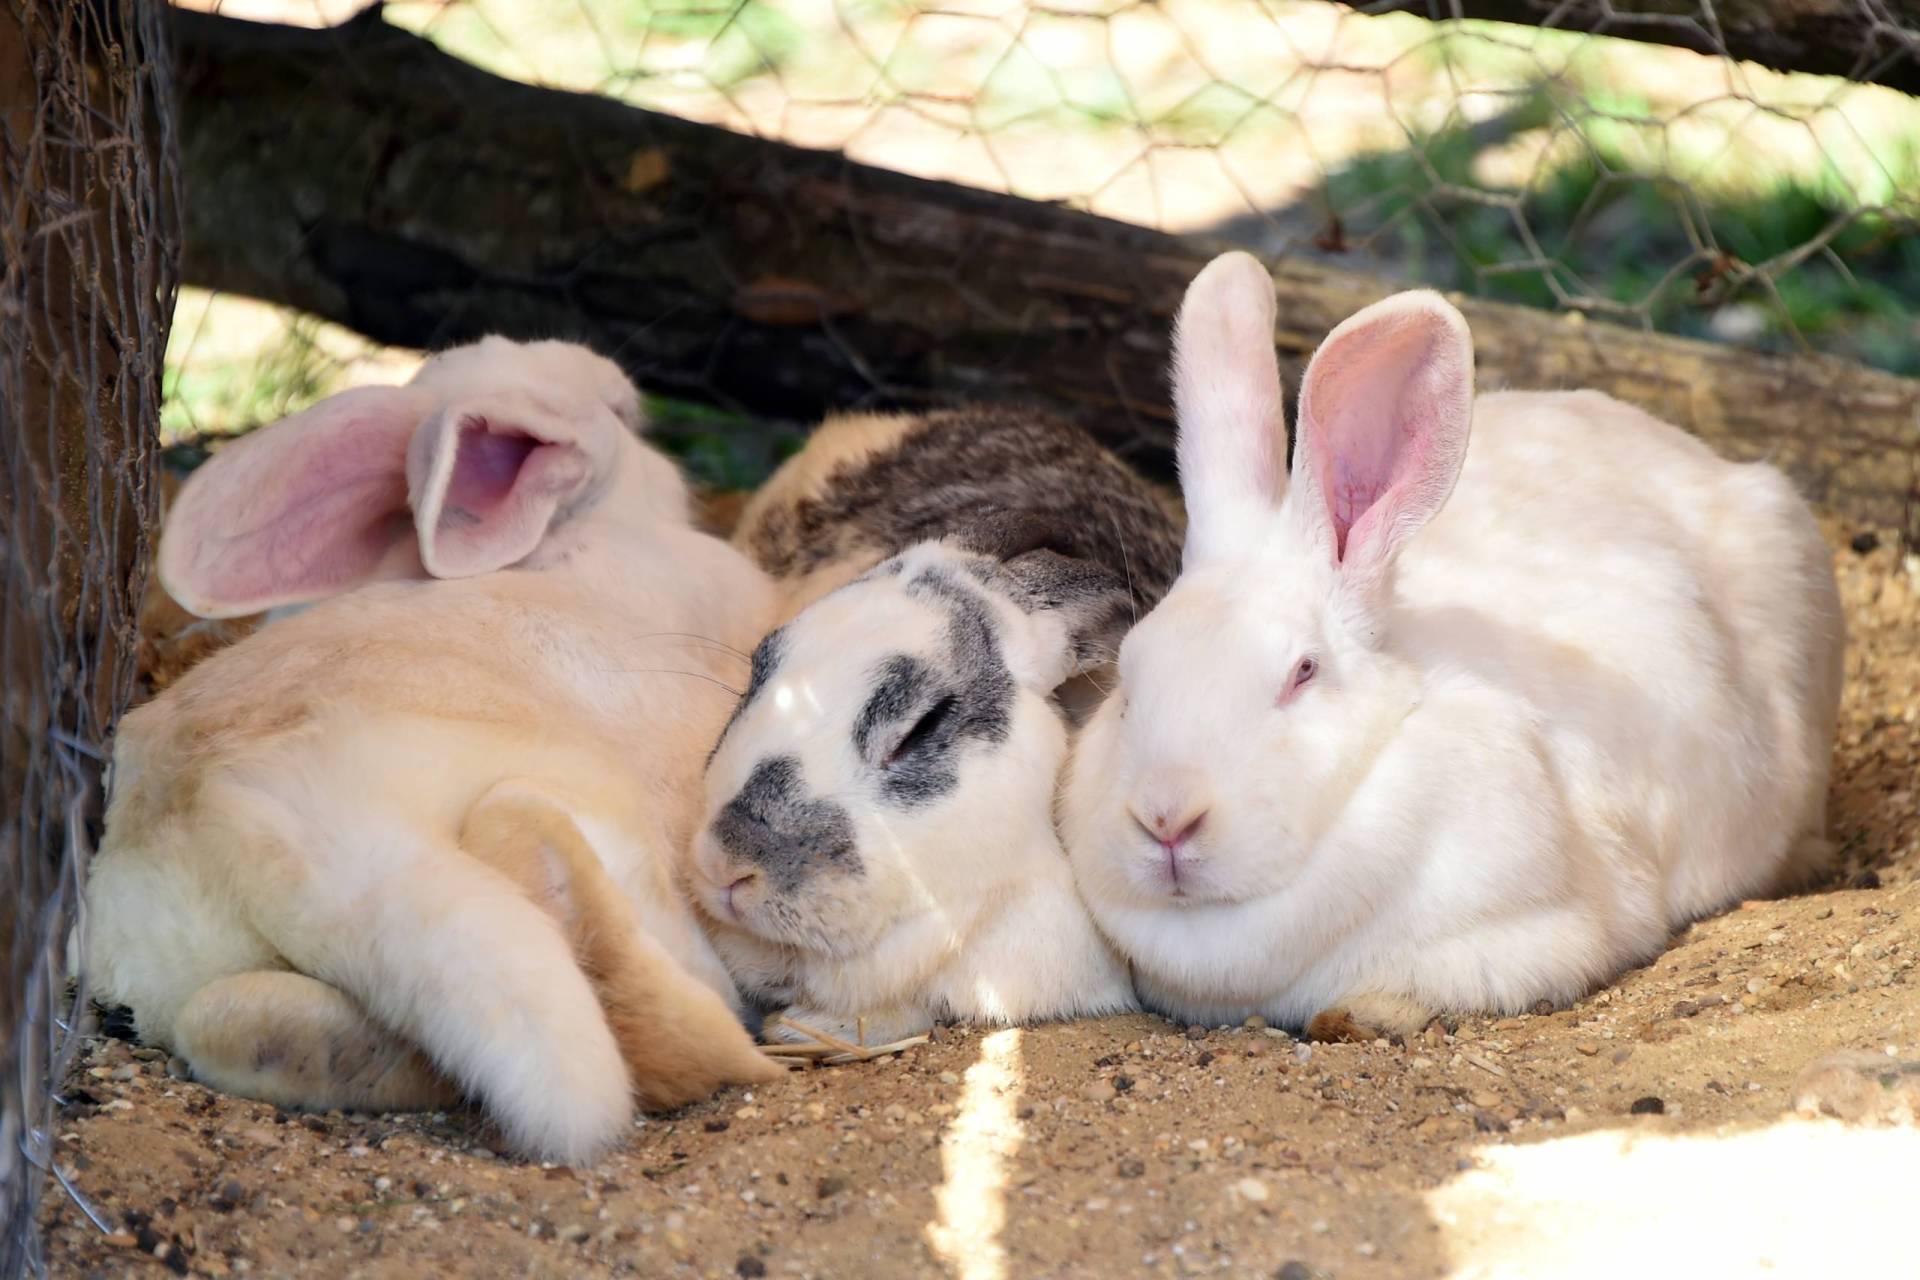 Three rabbit lie snuggled close together in a pen.